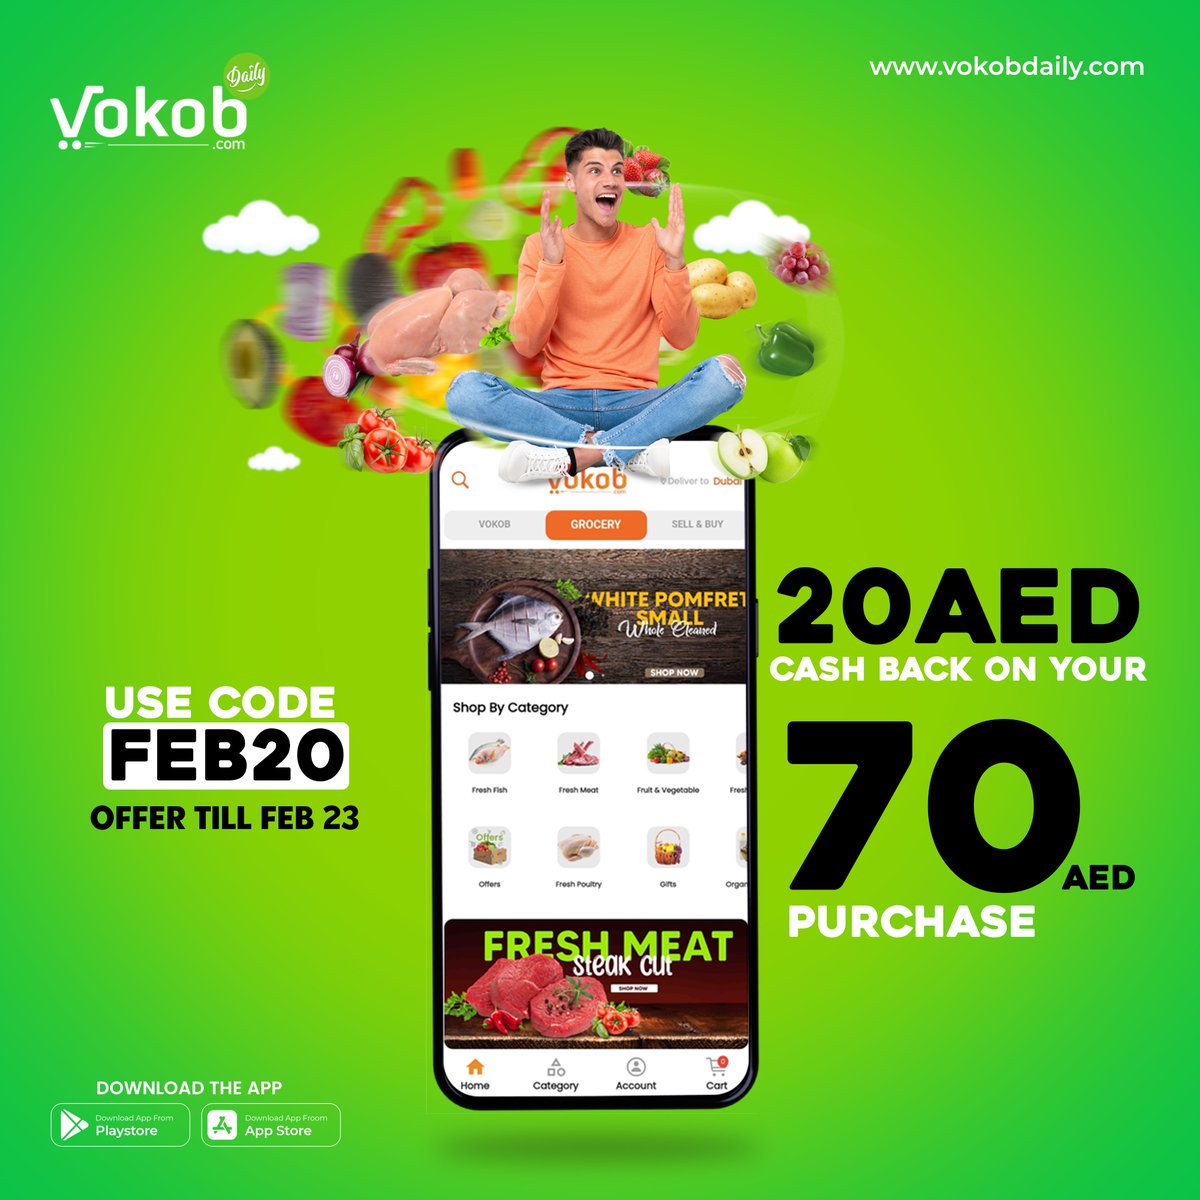 Get a 20 AED discount! Use code FEB20 and get 20 AED free on a 70 AED purchase. SHOP NOW! vokobdaily.com

#cashback #cashbackoffer #offer #offers #OfferSale #offerprice #shopnow #shopnowonline #discountsale #discountcode #discountoffer #discountstore #discount